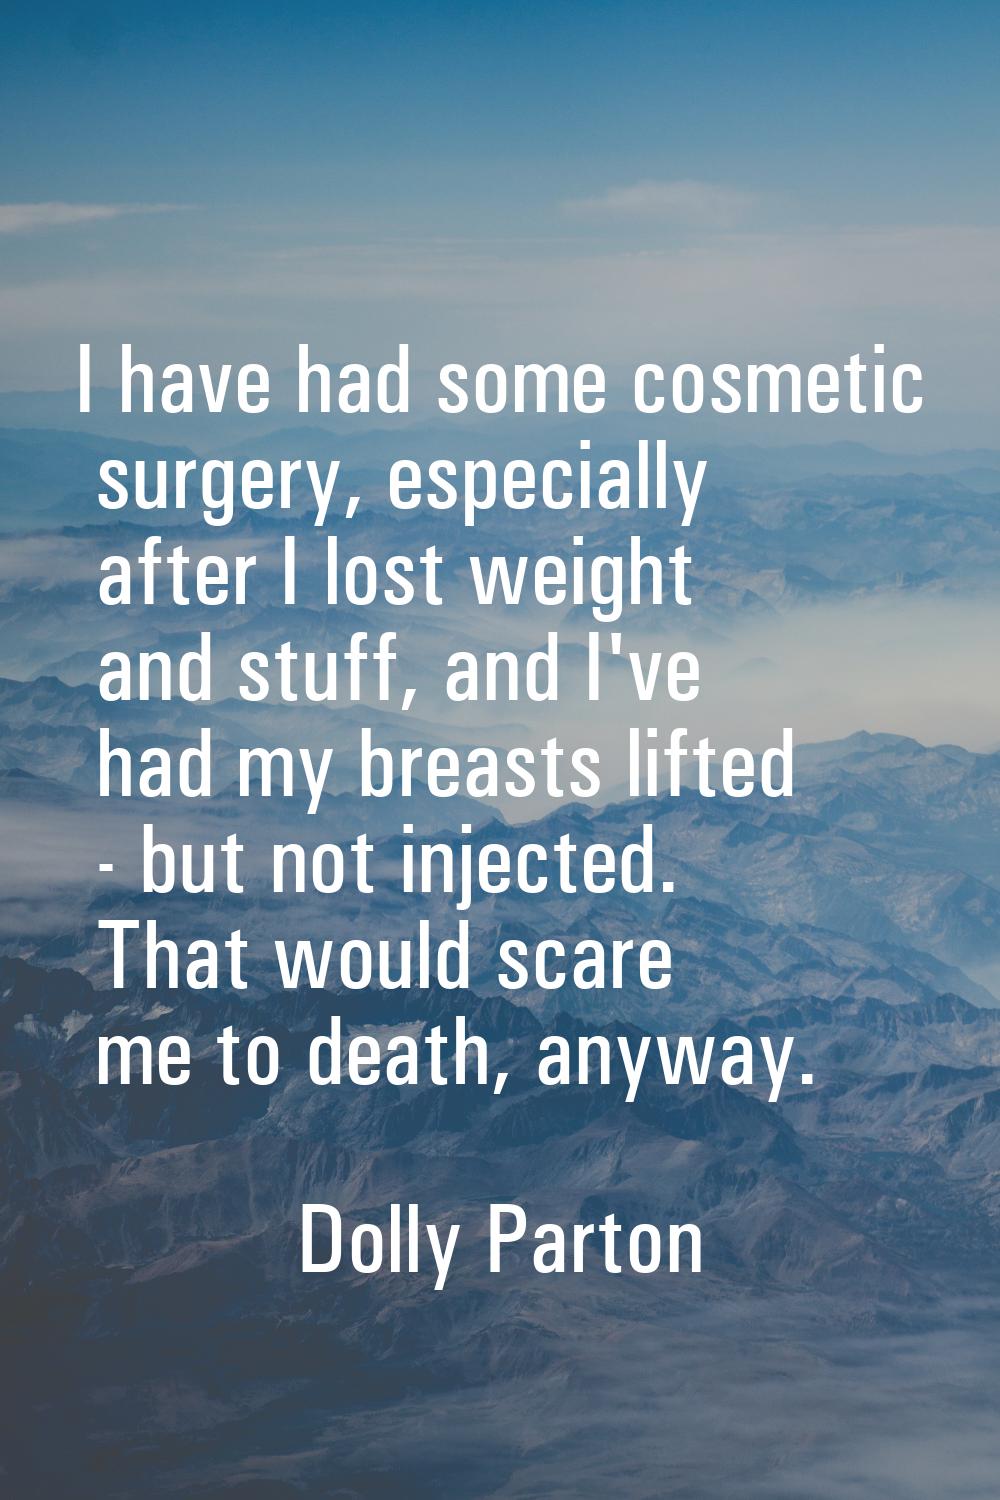 I have had some cosmetic surgery, especially after I lost weight and stuff, and I've had my breasts